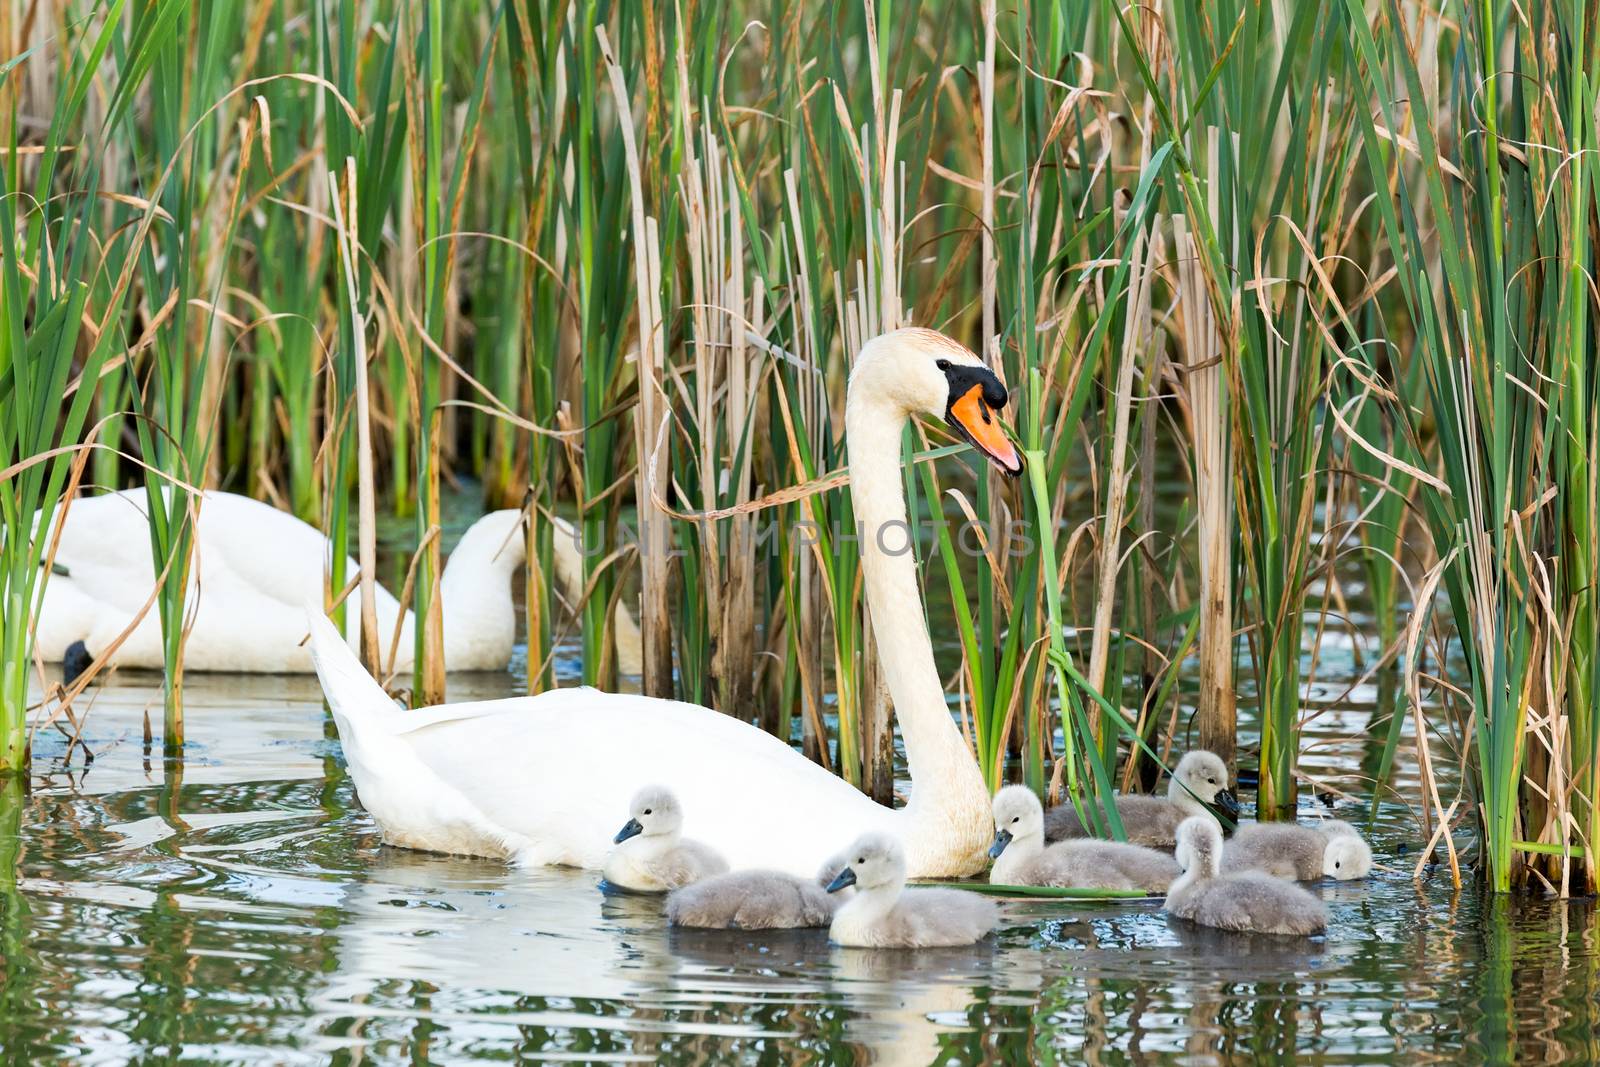 Couple white swans with young cygnets by BenSchonewille